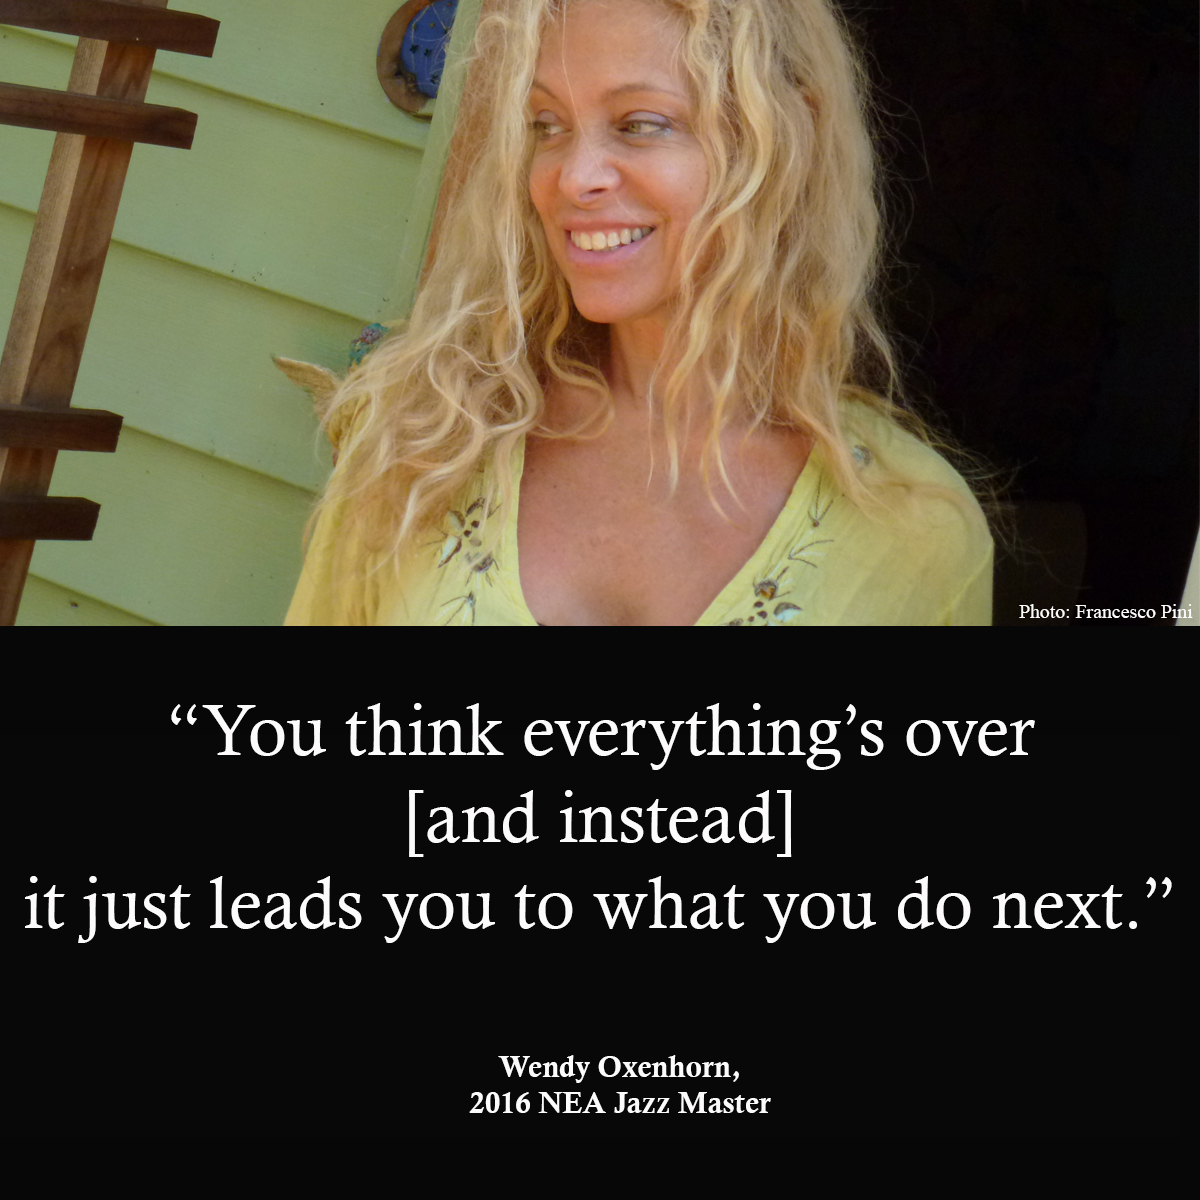 Wendy Oxenhorn looking down and smiling with quote: “You think everything’s over [and instead] it just leads you to what you do next.”